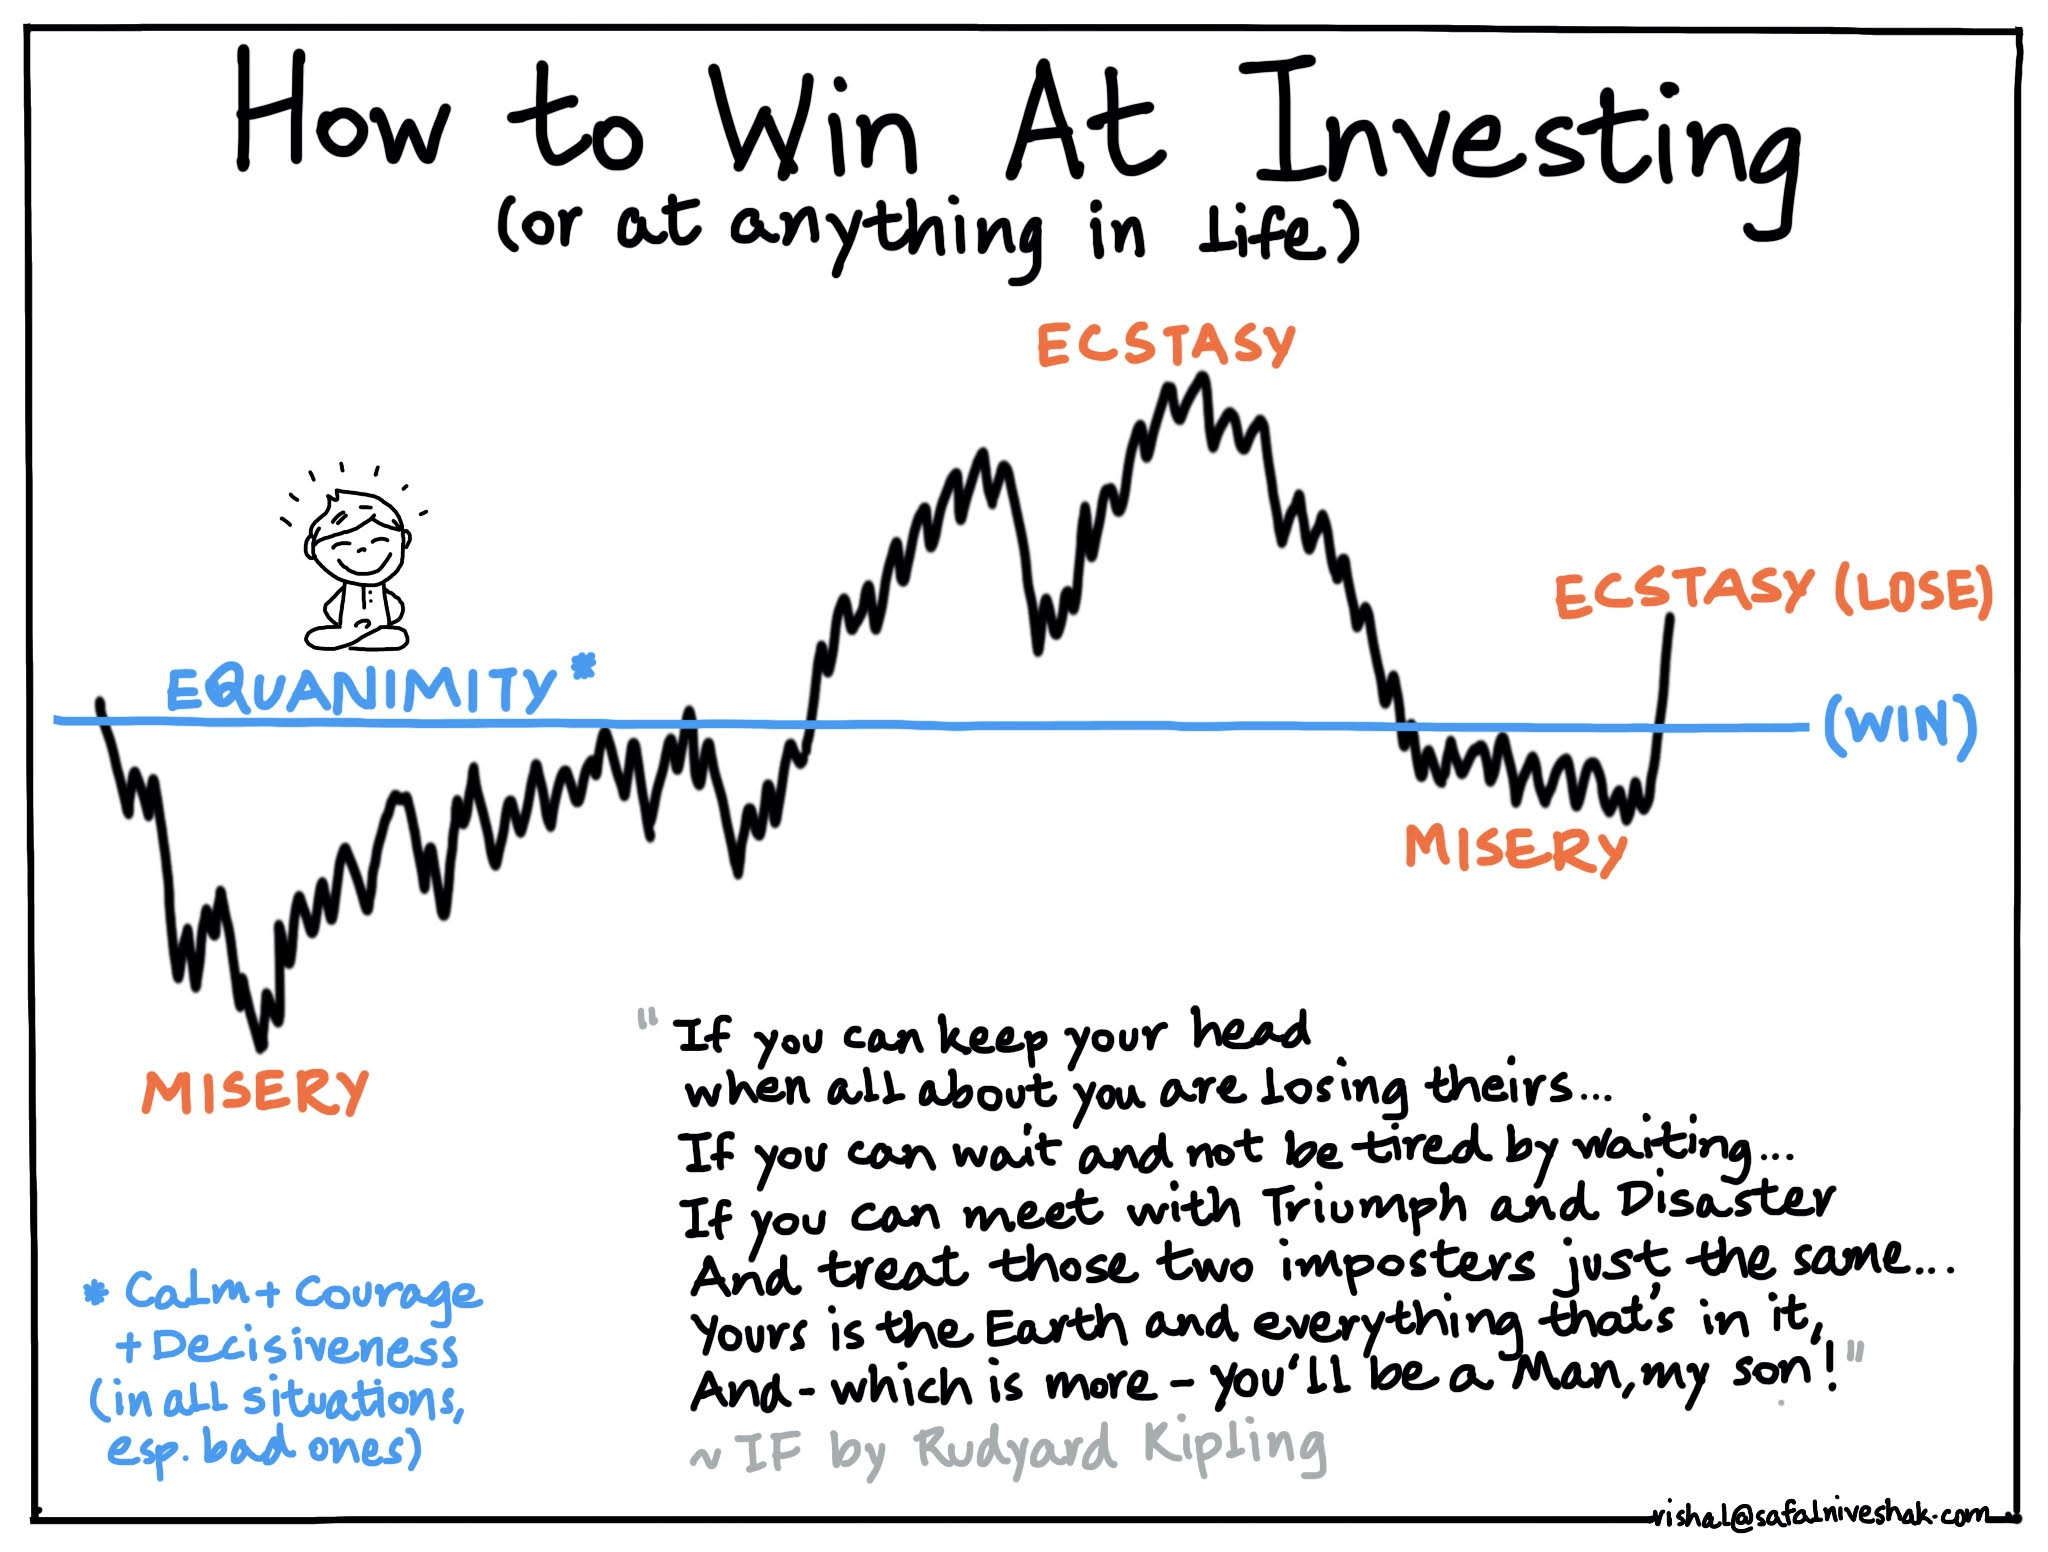 How to win at investing